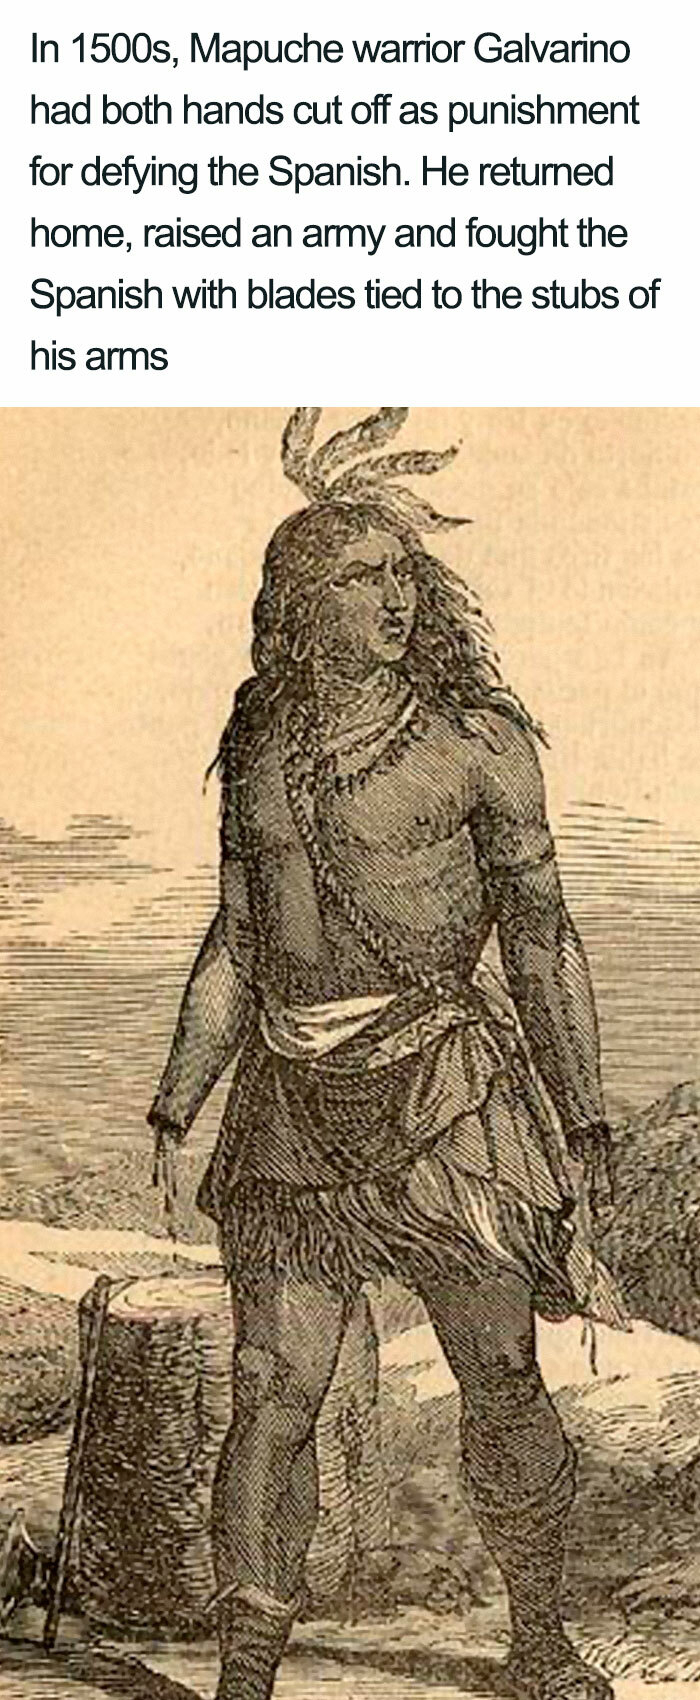 In 1500s, Mapuche warrior Galvarino had both hands cut off as punishment for defying the Spanish. He retumed home, raised an army and fought the Spanish with blades tied to the stubs of his arms